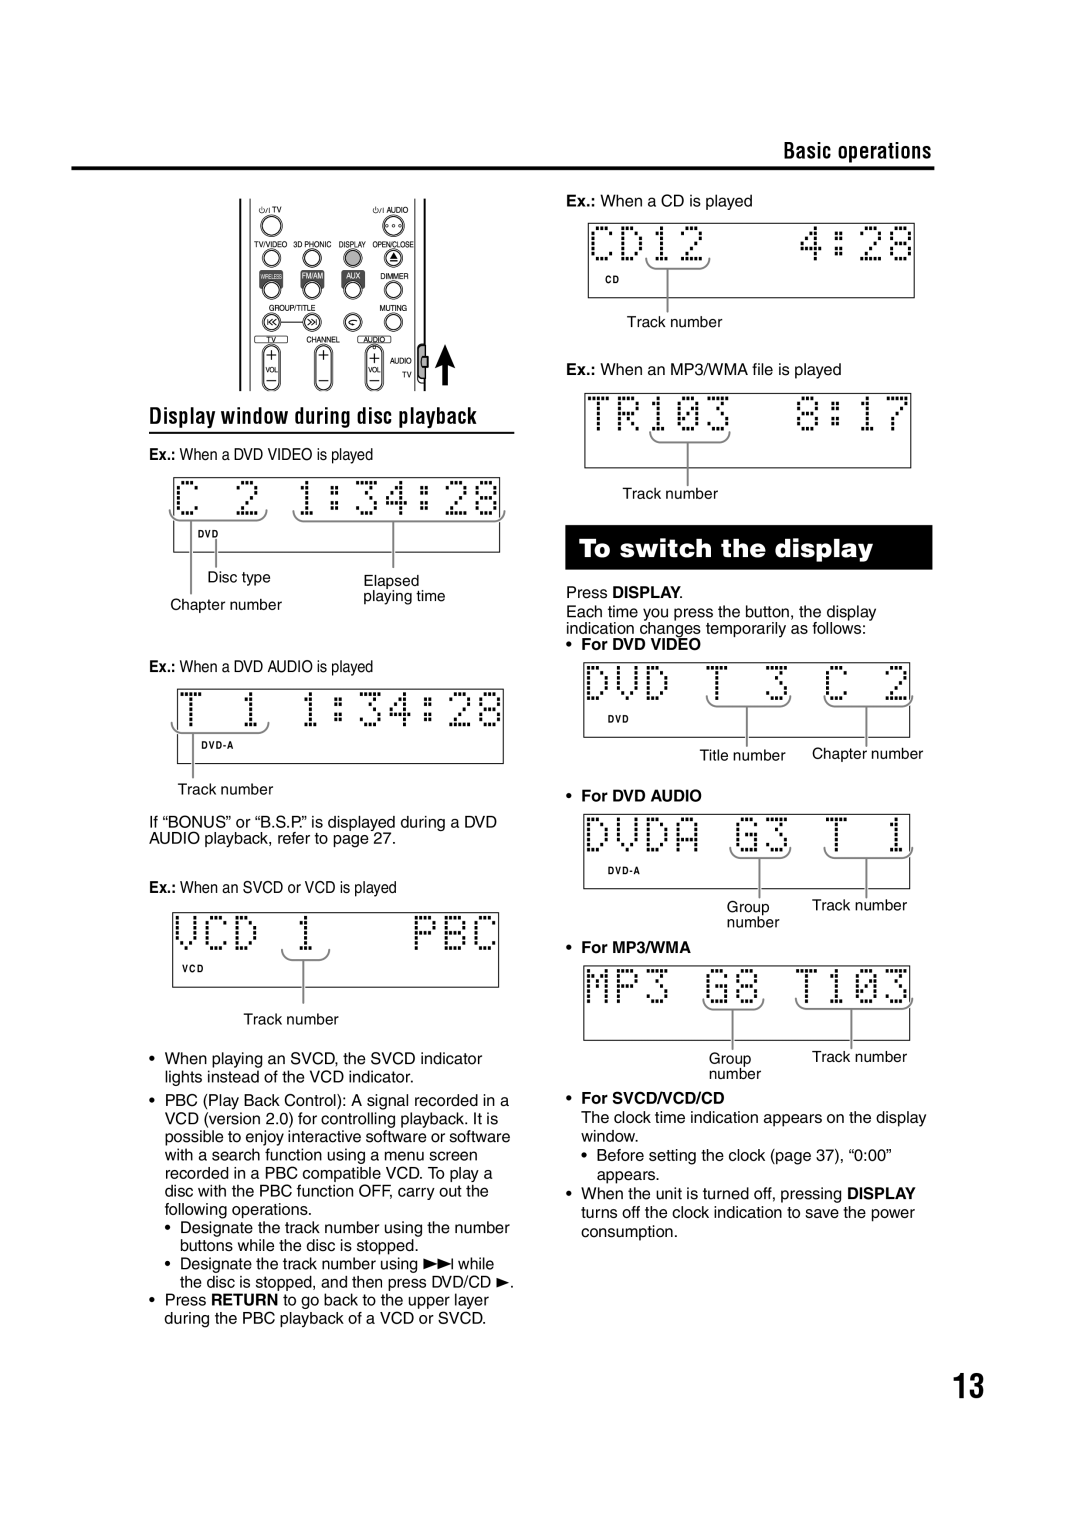 JVC GVT0144-005A manual To switch the display, Display window during disc playback, Basic operations 